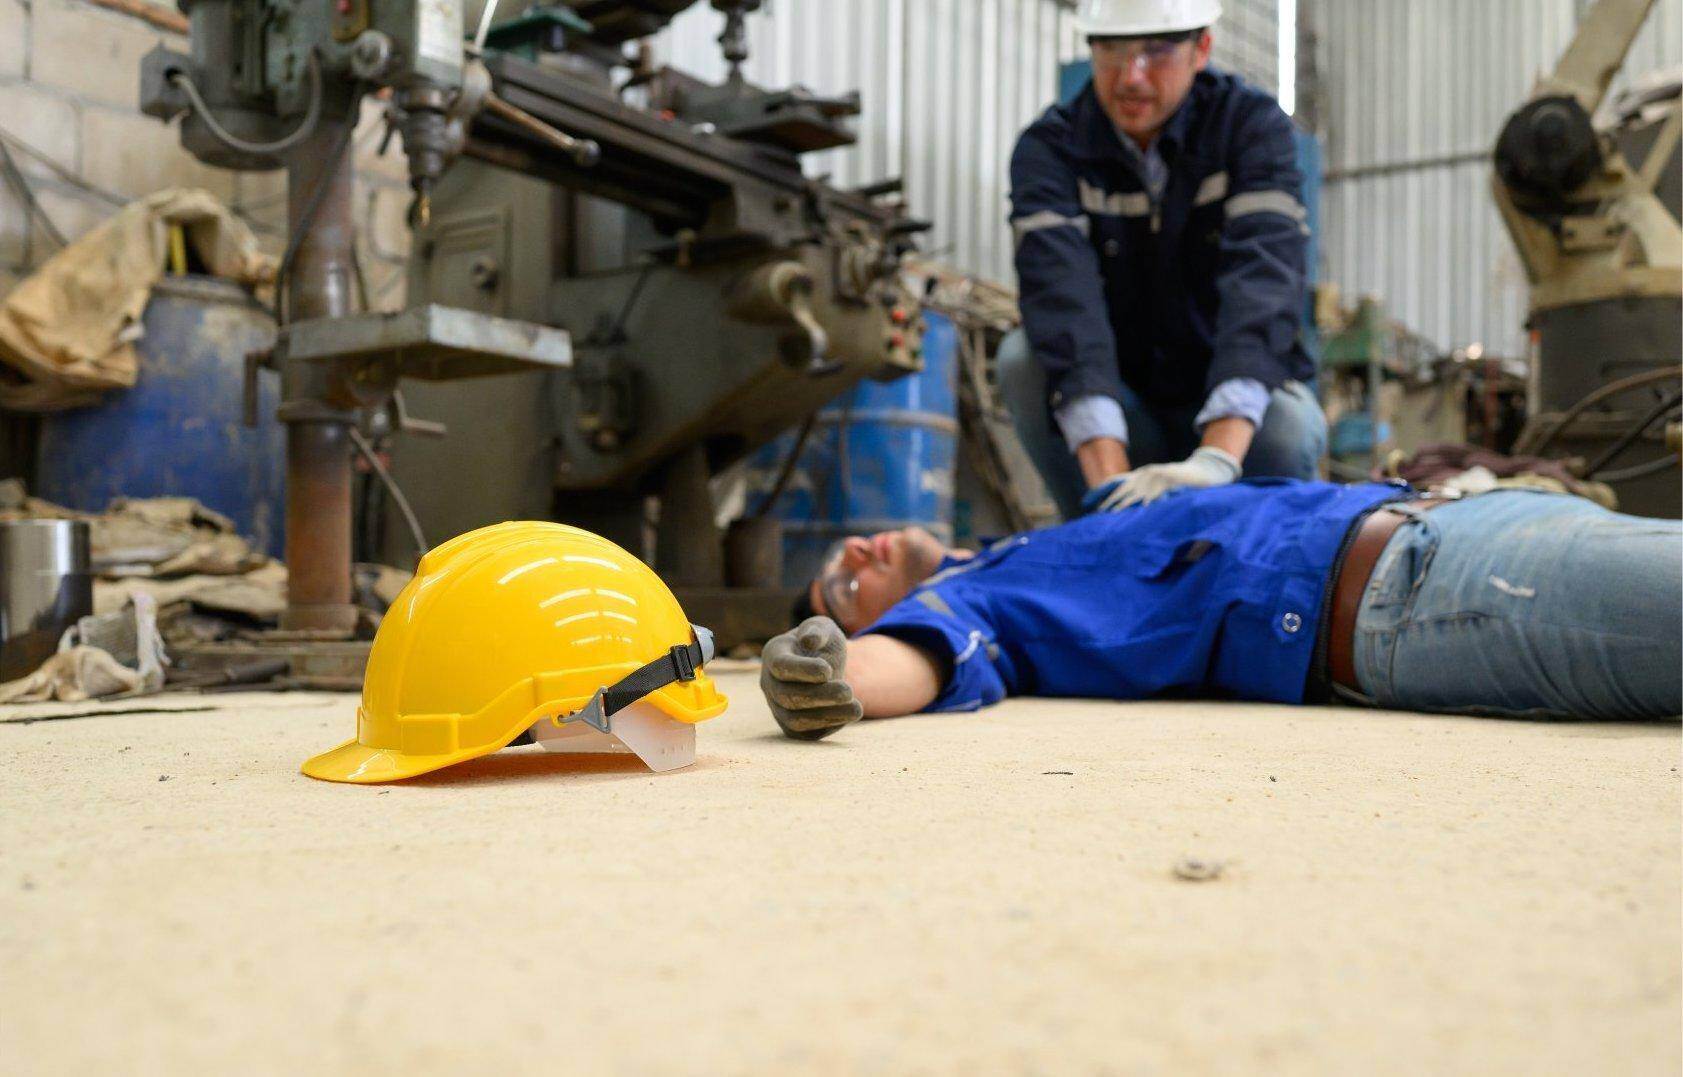 An unconscious man who has been injured on the job who will file for workers compensation in Winder, Georgia